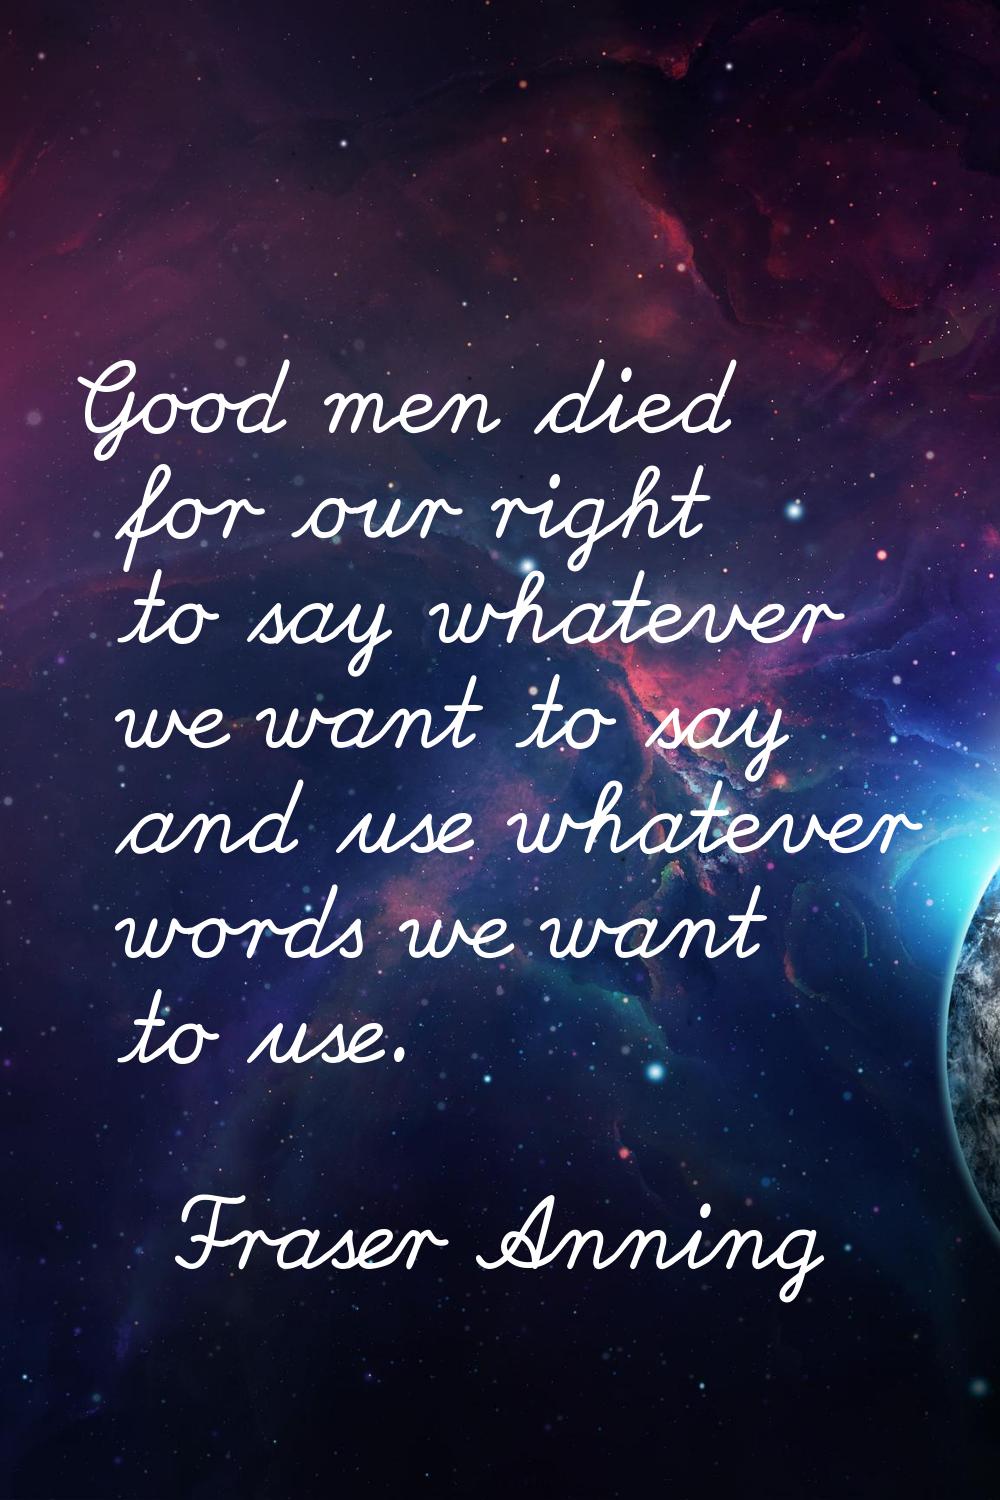 Good men died for our right to say whatever we want to say and use whatever words we want to use.